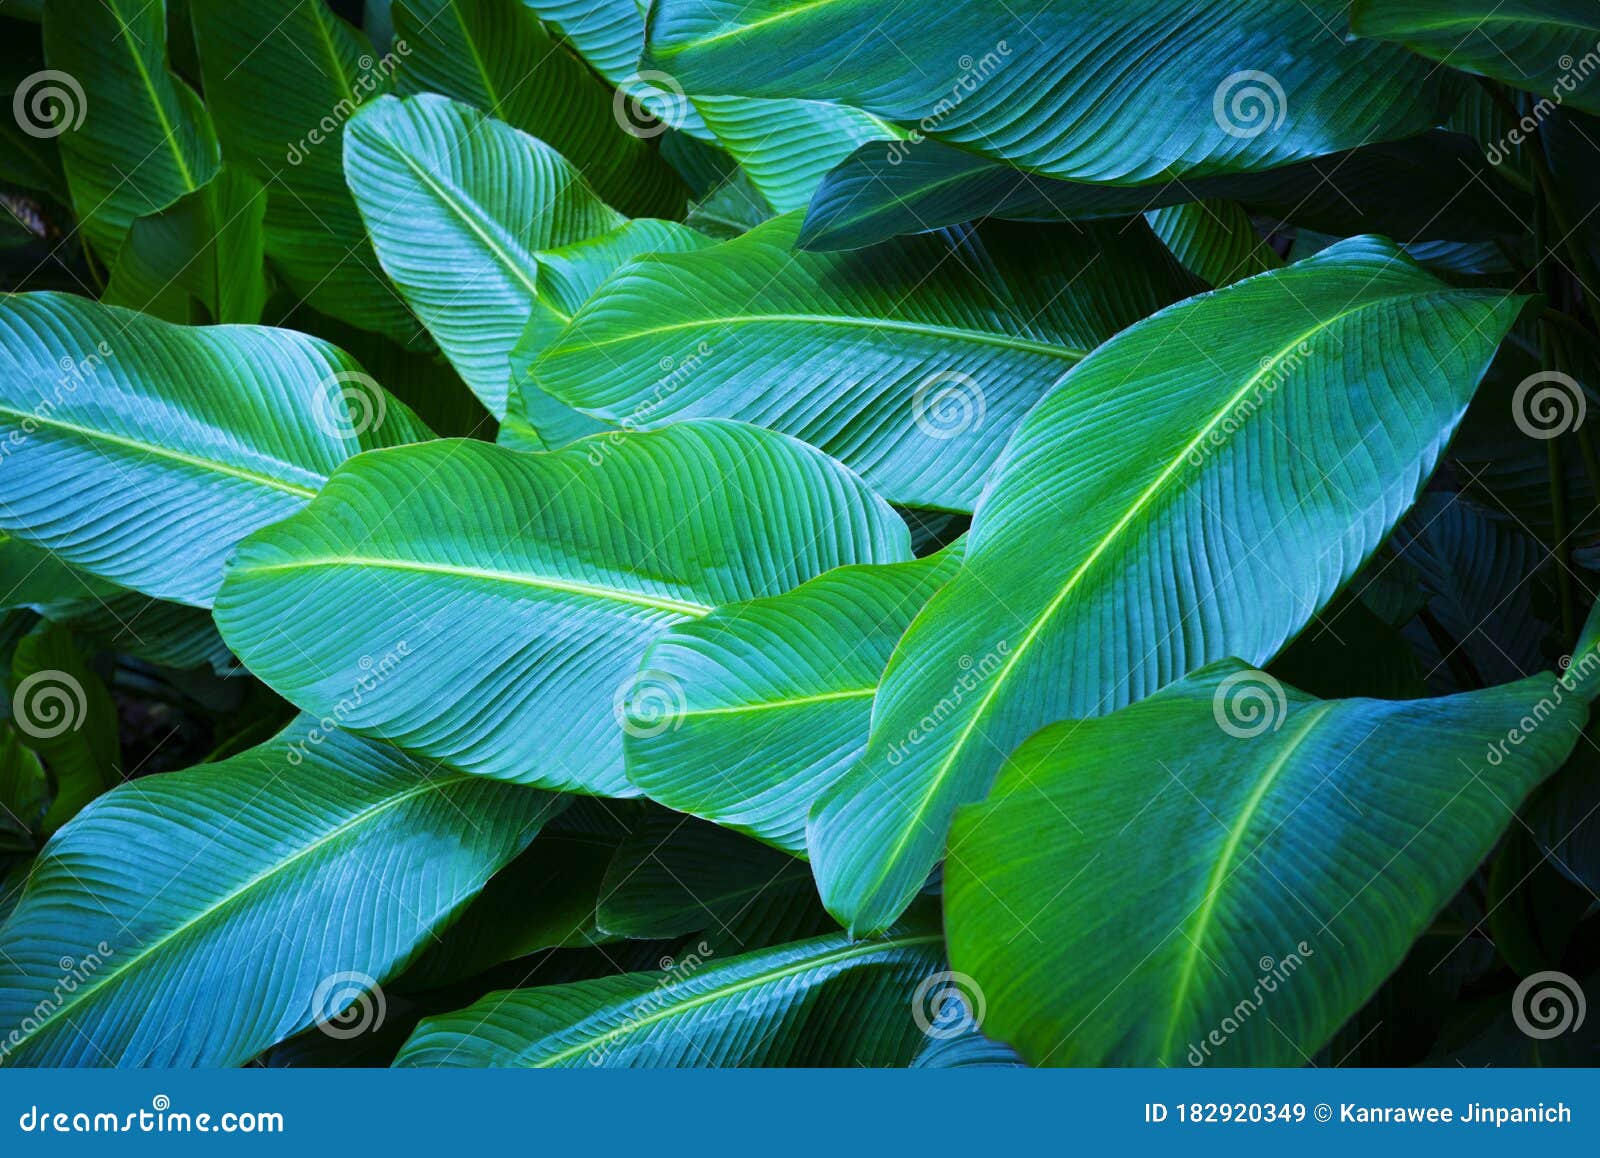 Tropical Banana Leaf Texture, Large Palm Foliage Nature Dark Green in